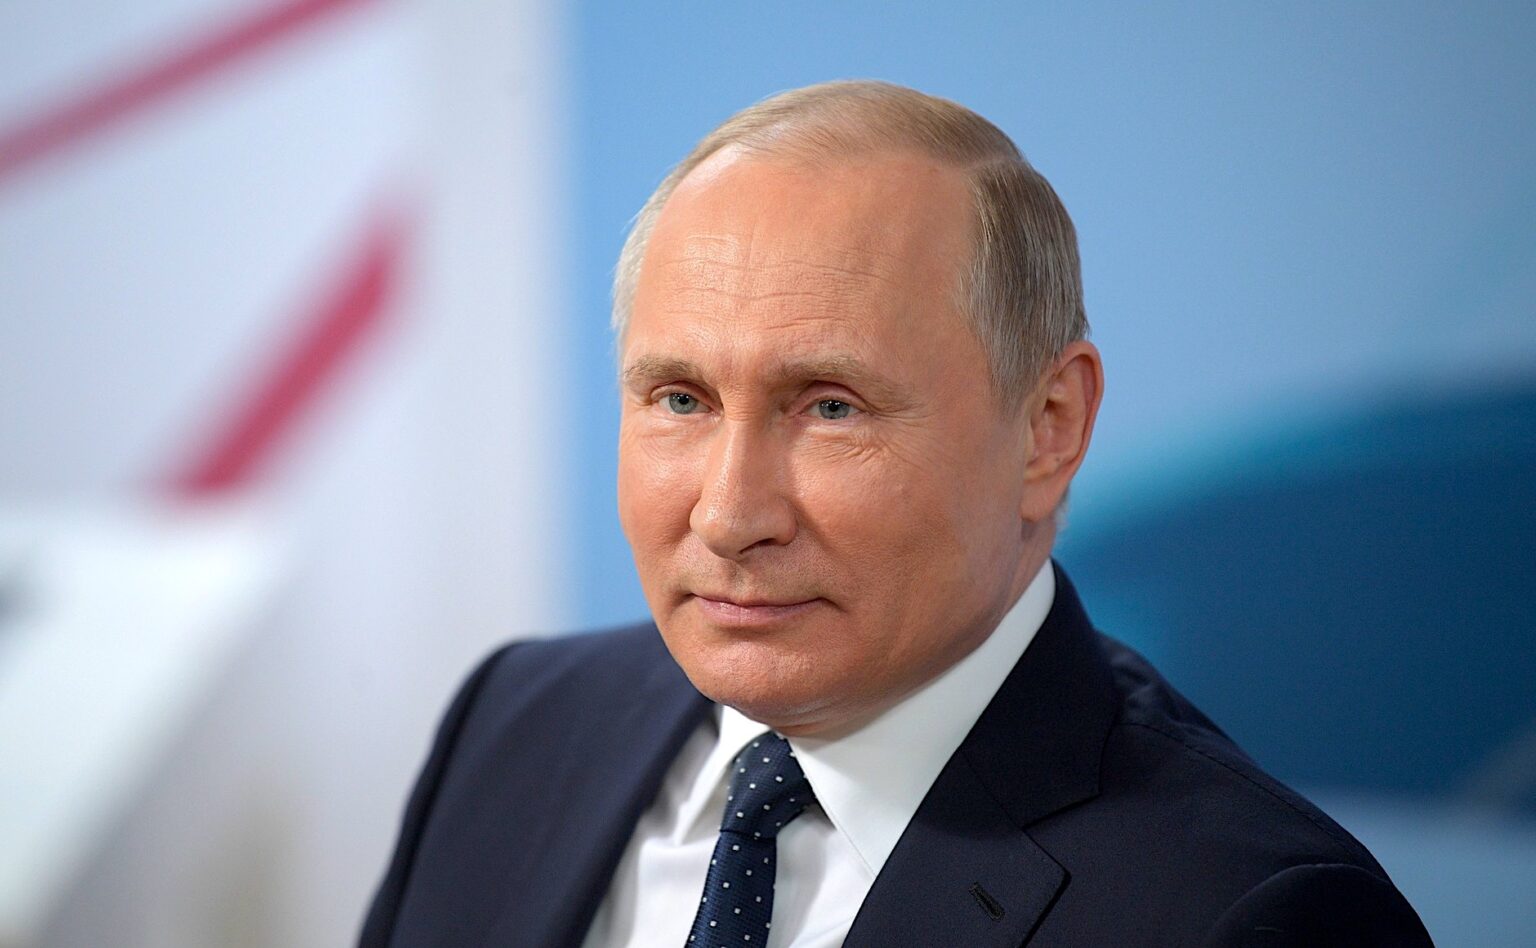 Russian President Vladimir Putin. Photo: Press Service of the Presidency of the Russian Federation